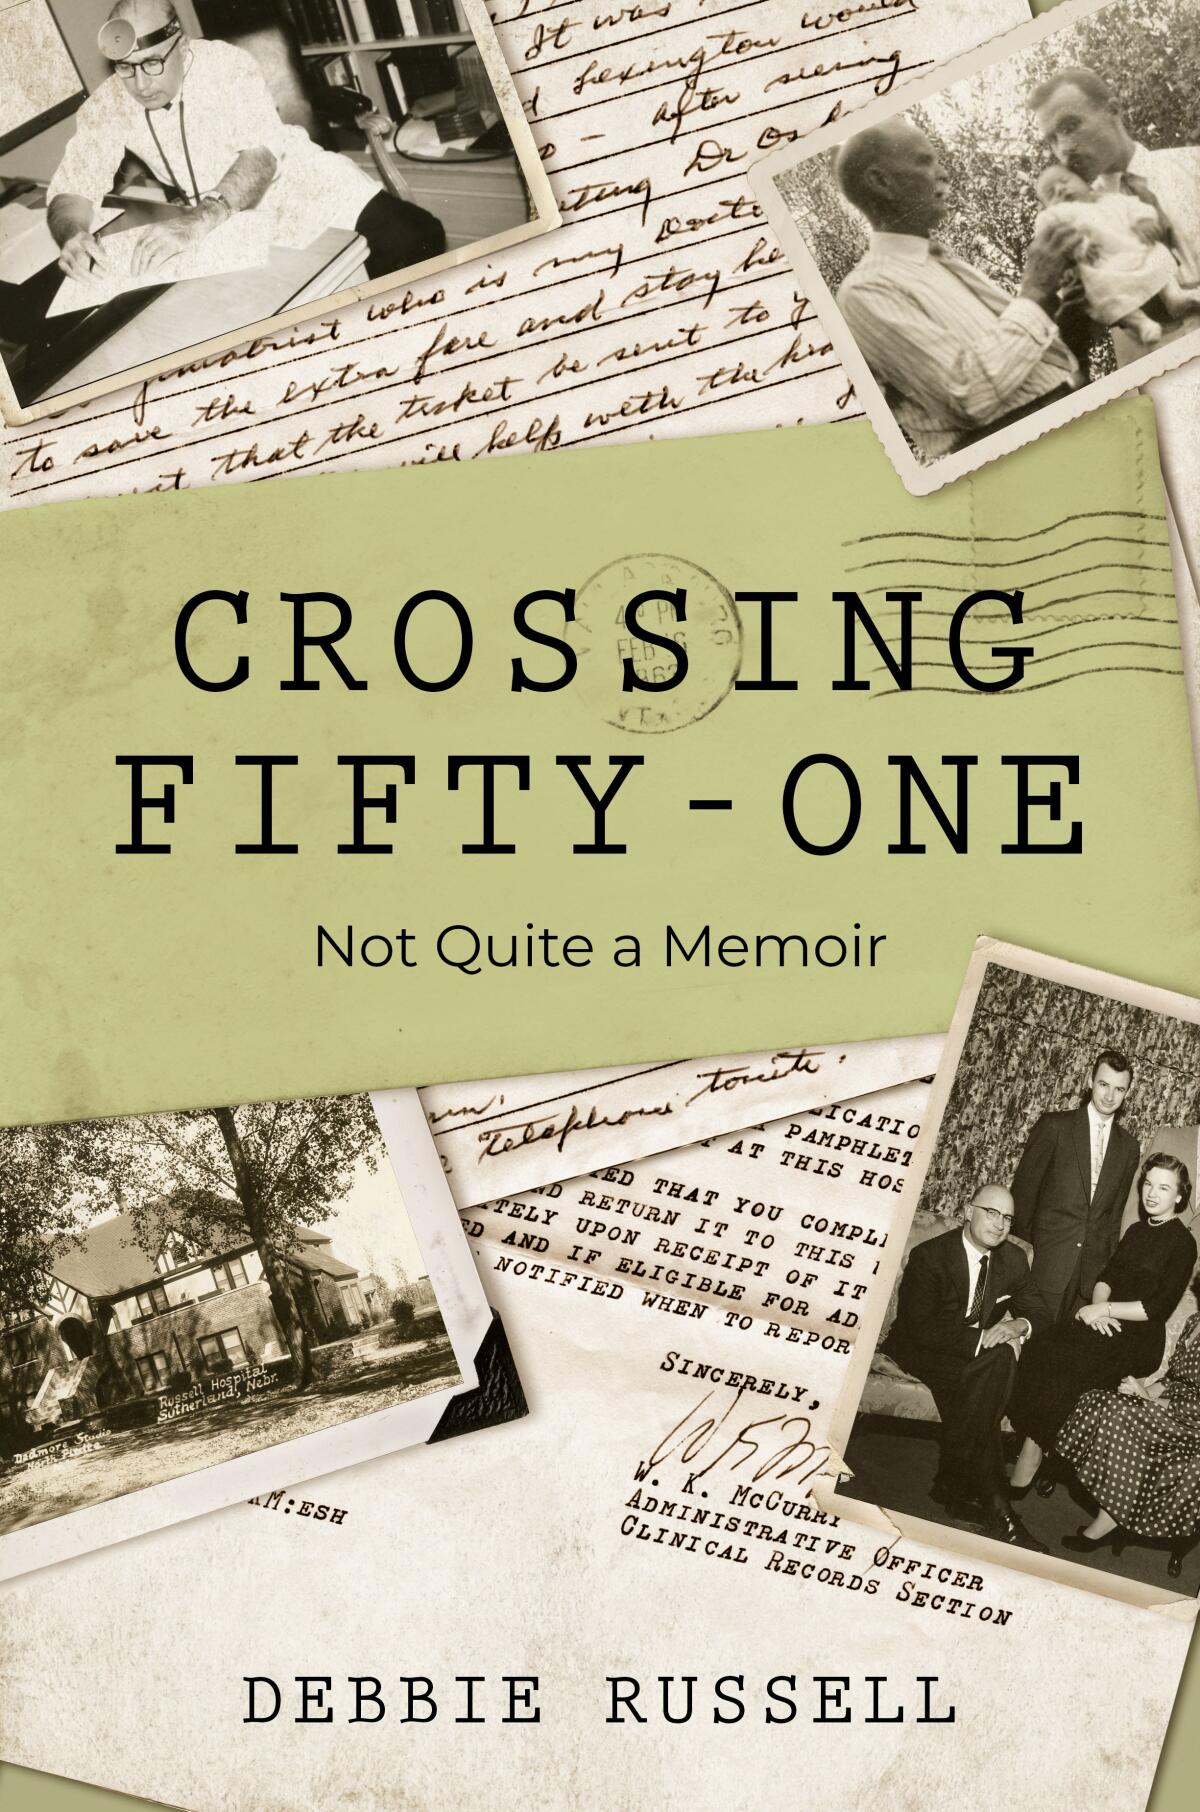 “Crossing Fifty-One: Not Quite a Memoir” is the debut book of Point Loma resident Debbie Russell.